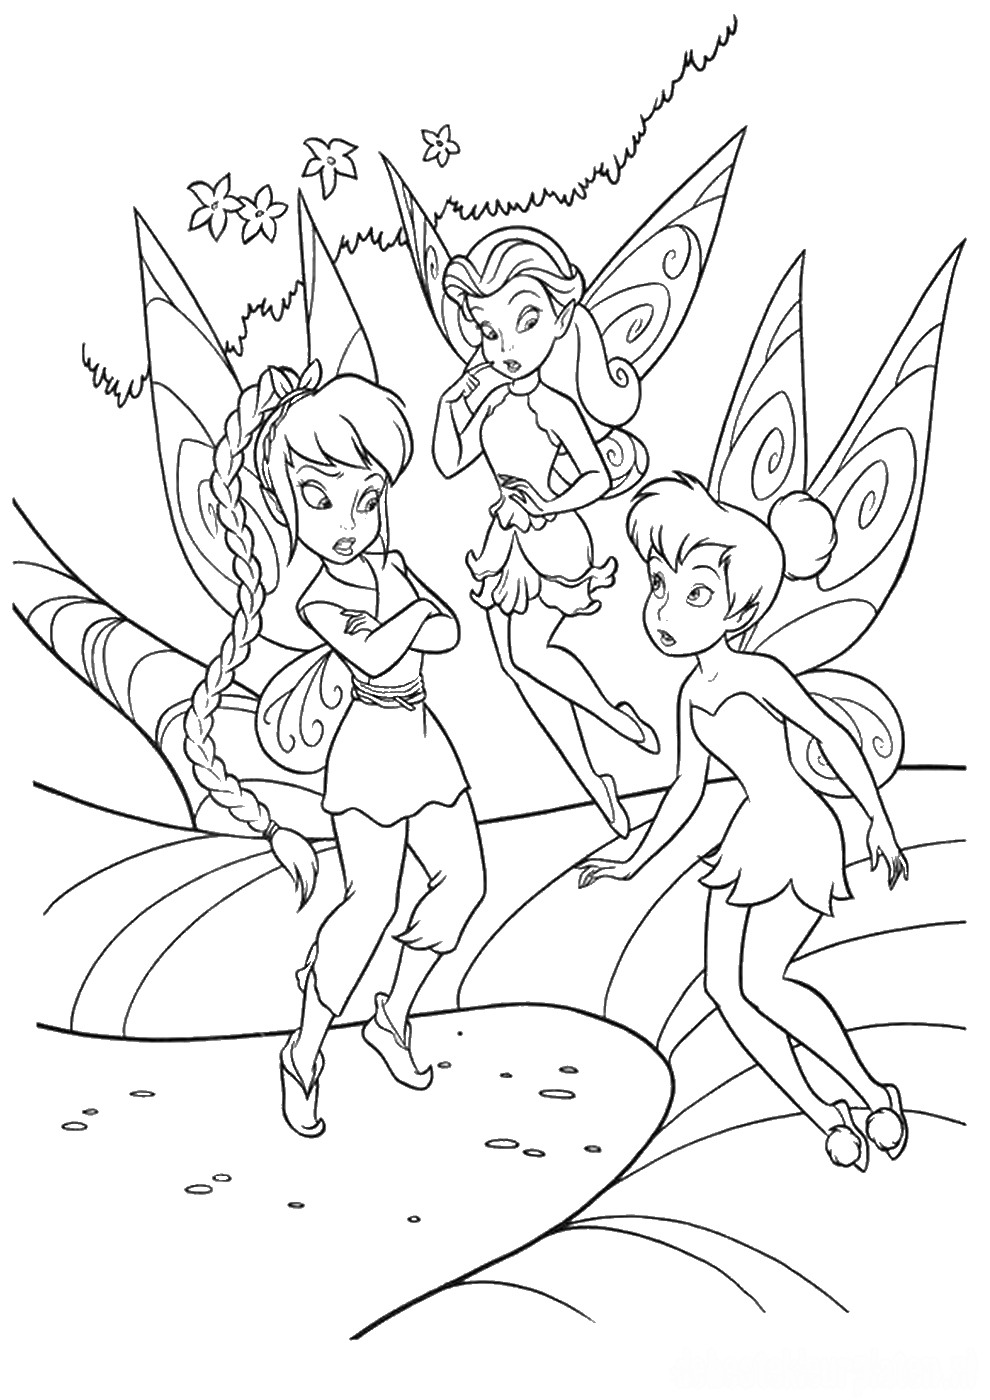 tinkerbell-coloring-pages